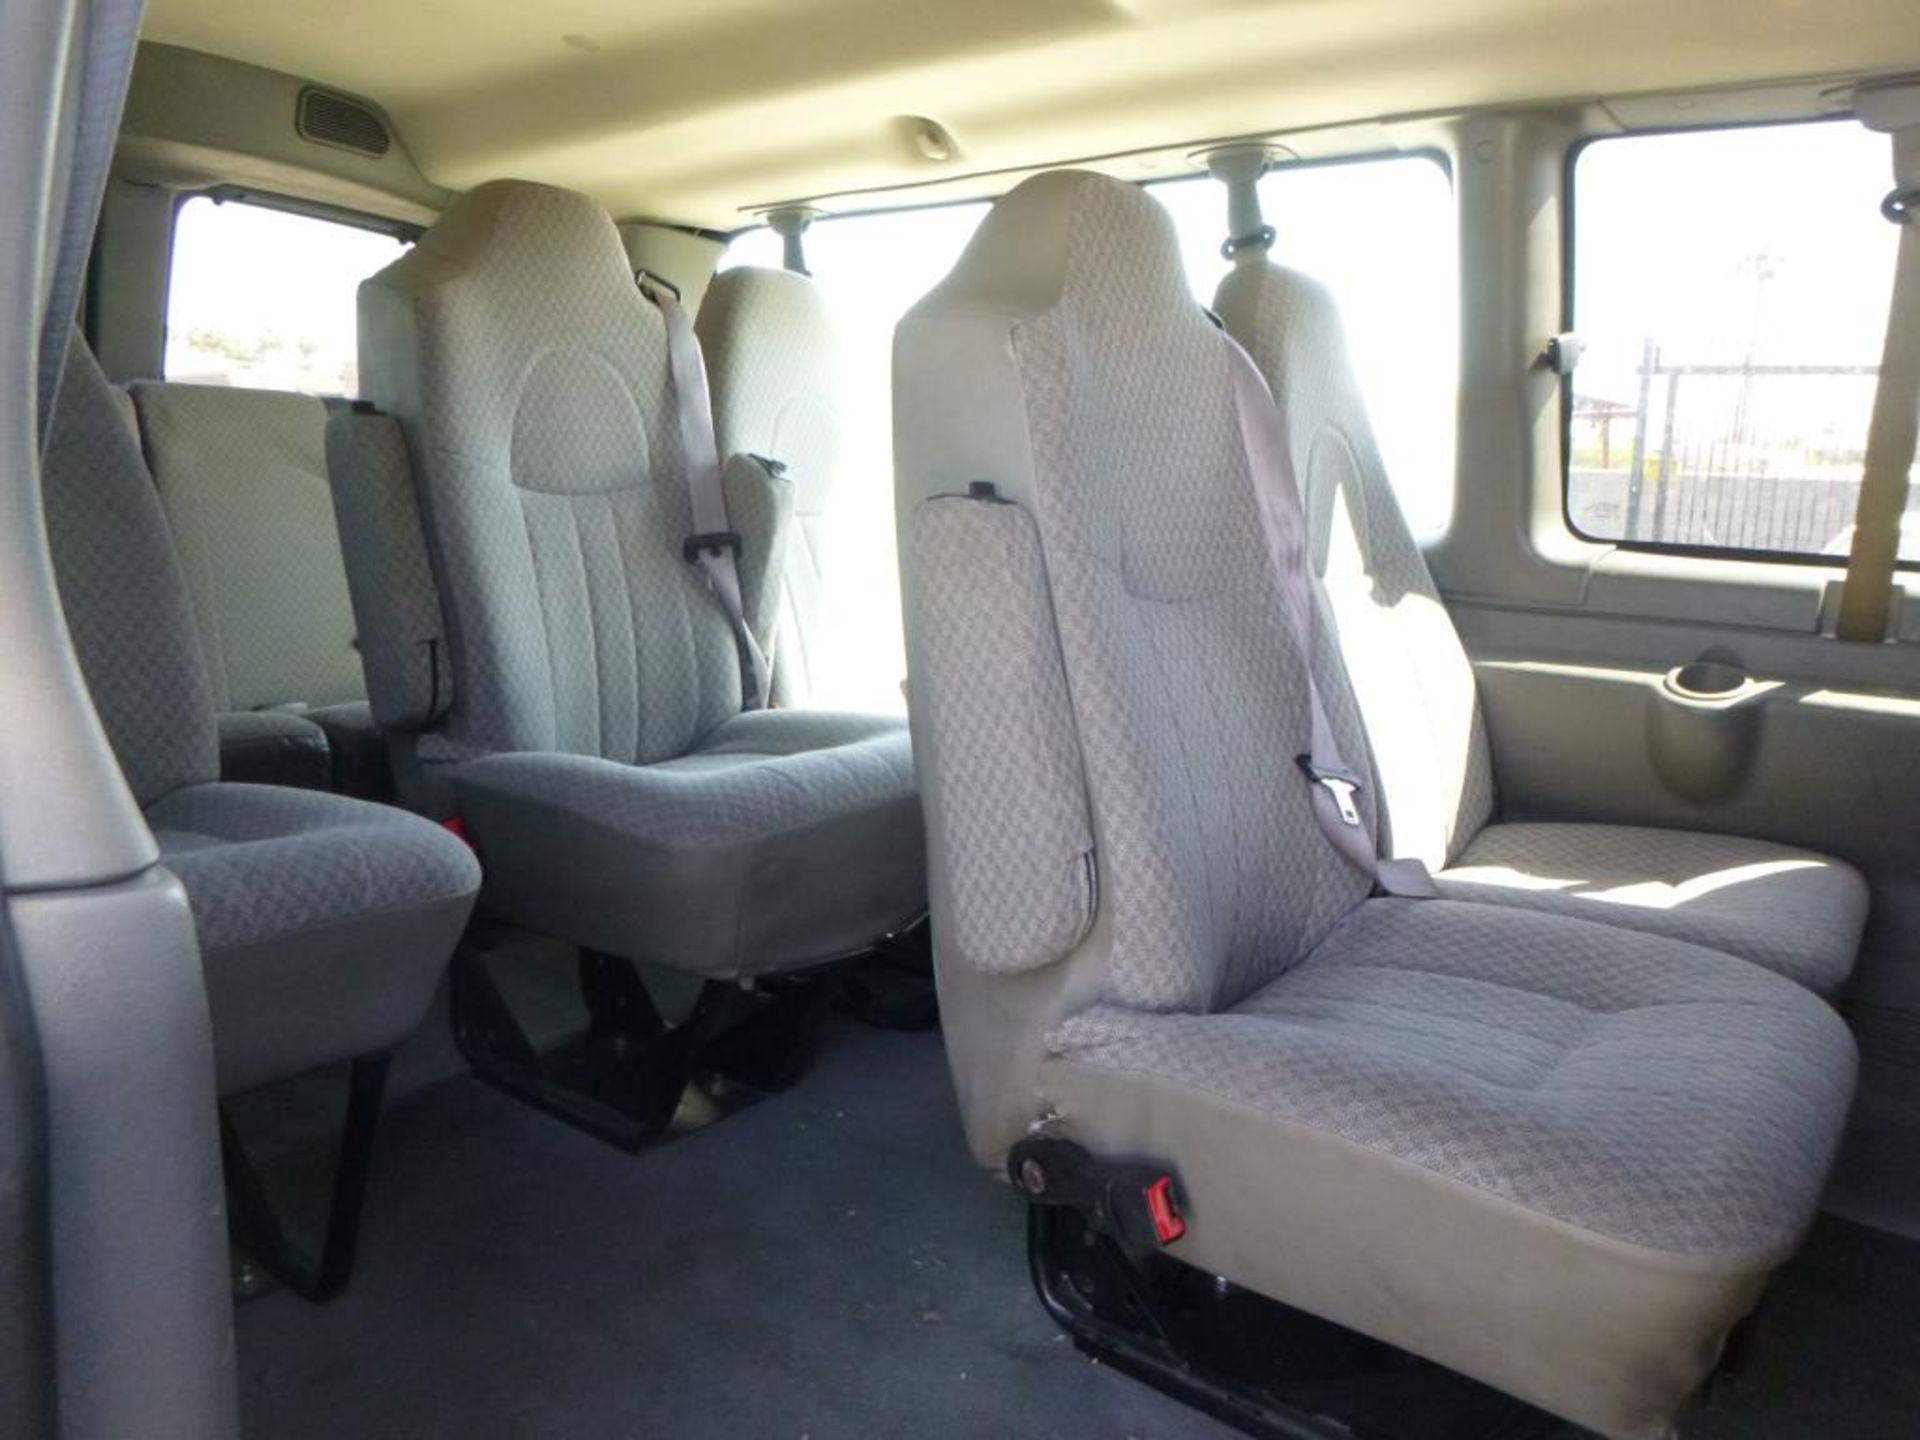 2008 Chevrolet Express - Image 8 of 14